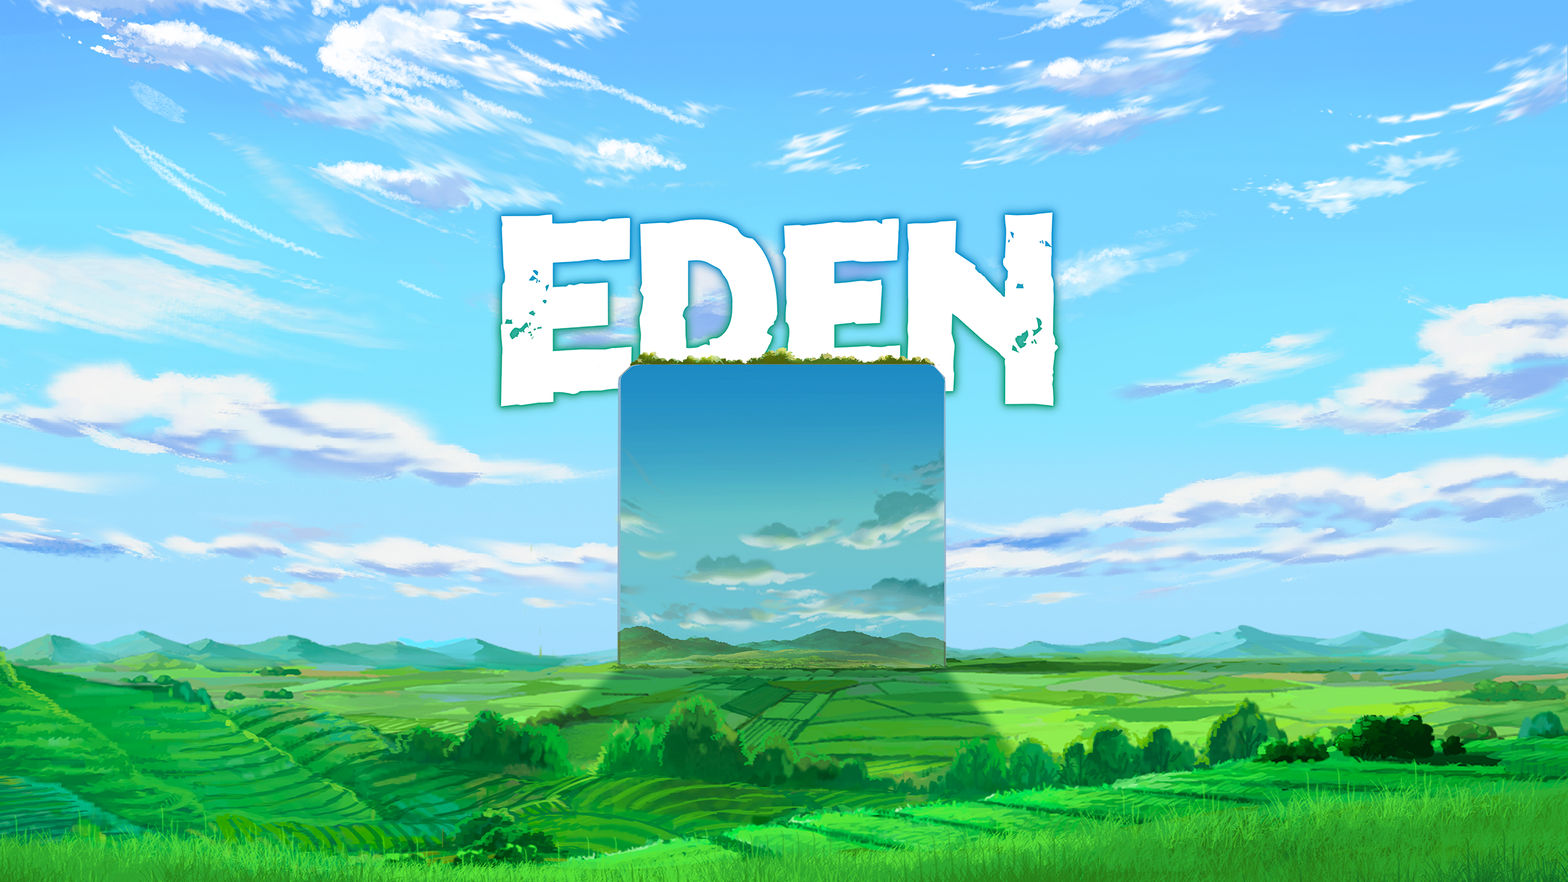 Eden Unearthed